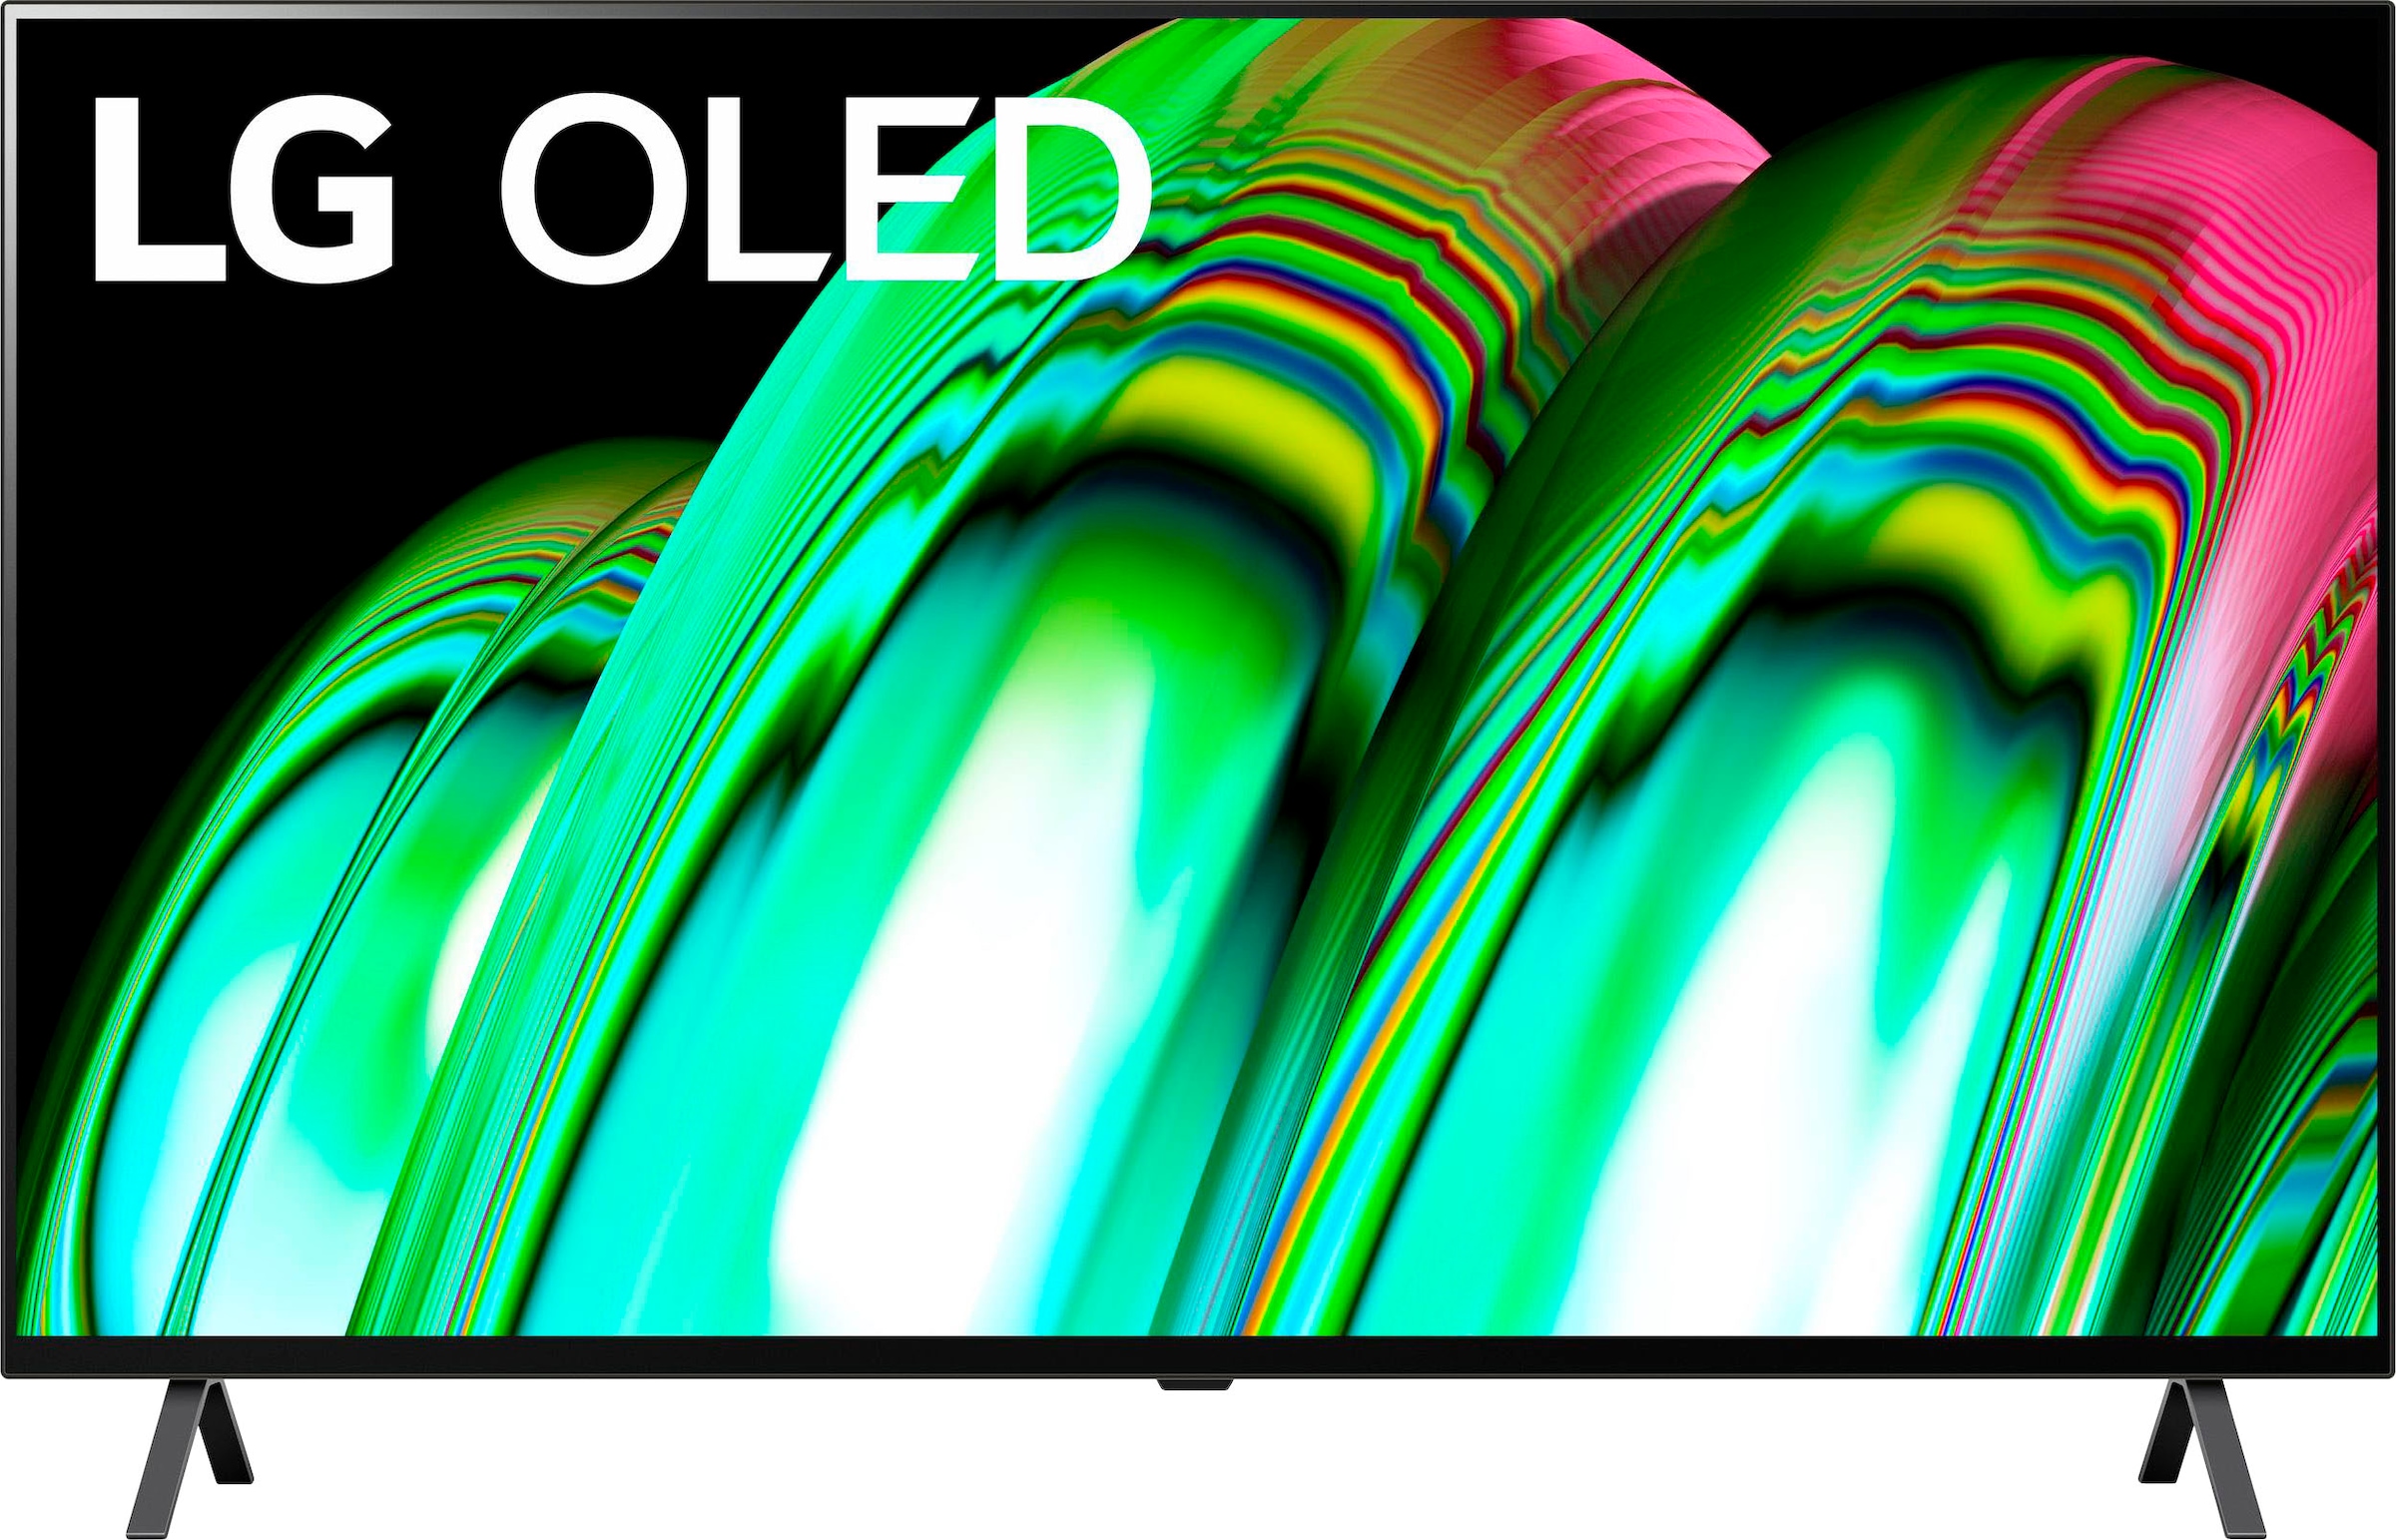 OLED-α7 139 »OLED55A29LA«, Gen5 Atmos-Single jetzt Ultra Vision HD, Smart-TV, Tuner cm/55 & Triple LG 4K online 4K OLED-Fernseher Zoll, bei OTTO AI-Prozessor-Dolby